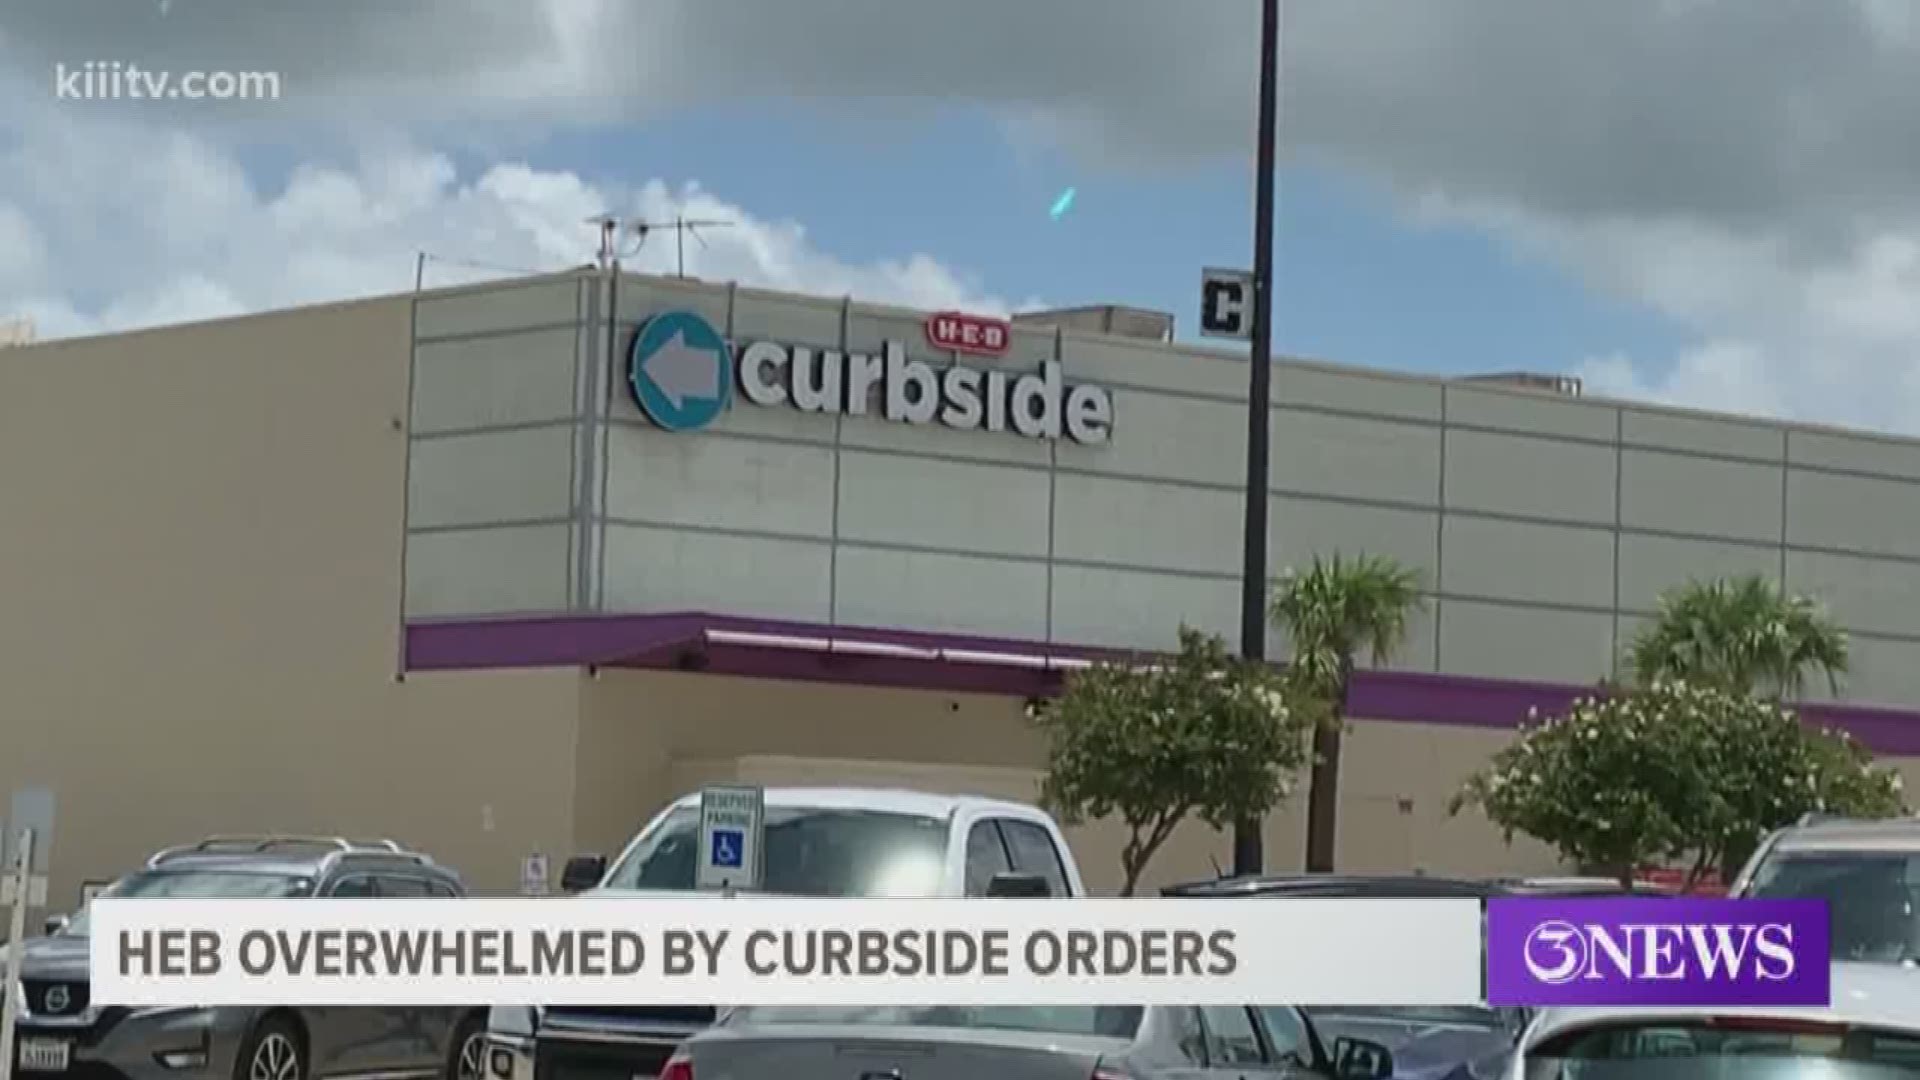 H-E-B told 3News in this statement “we are seeing a high demand in curbside and we are working diligently to support the customer's demand."